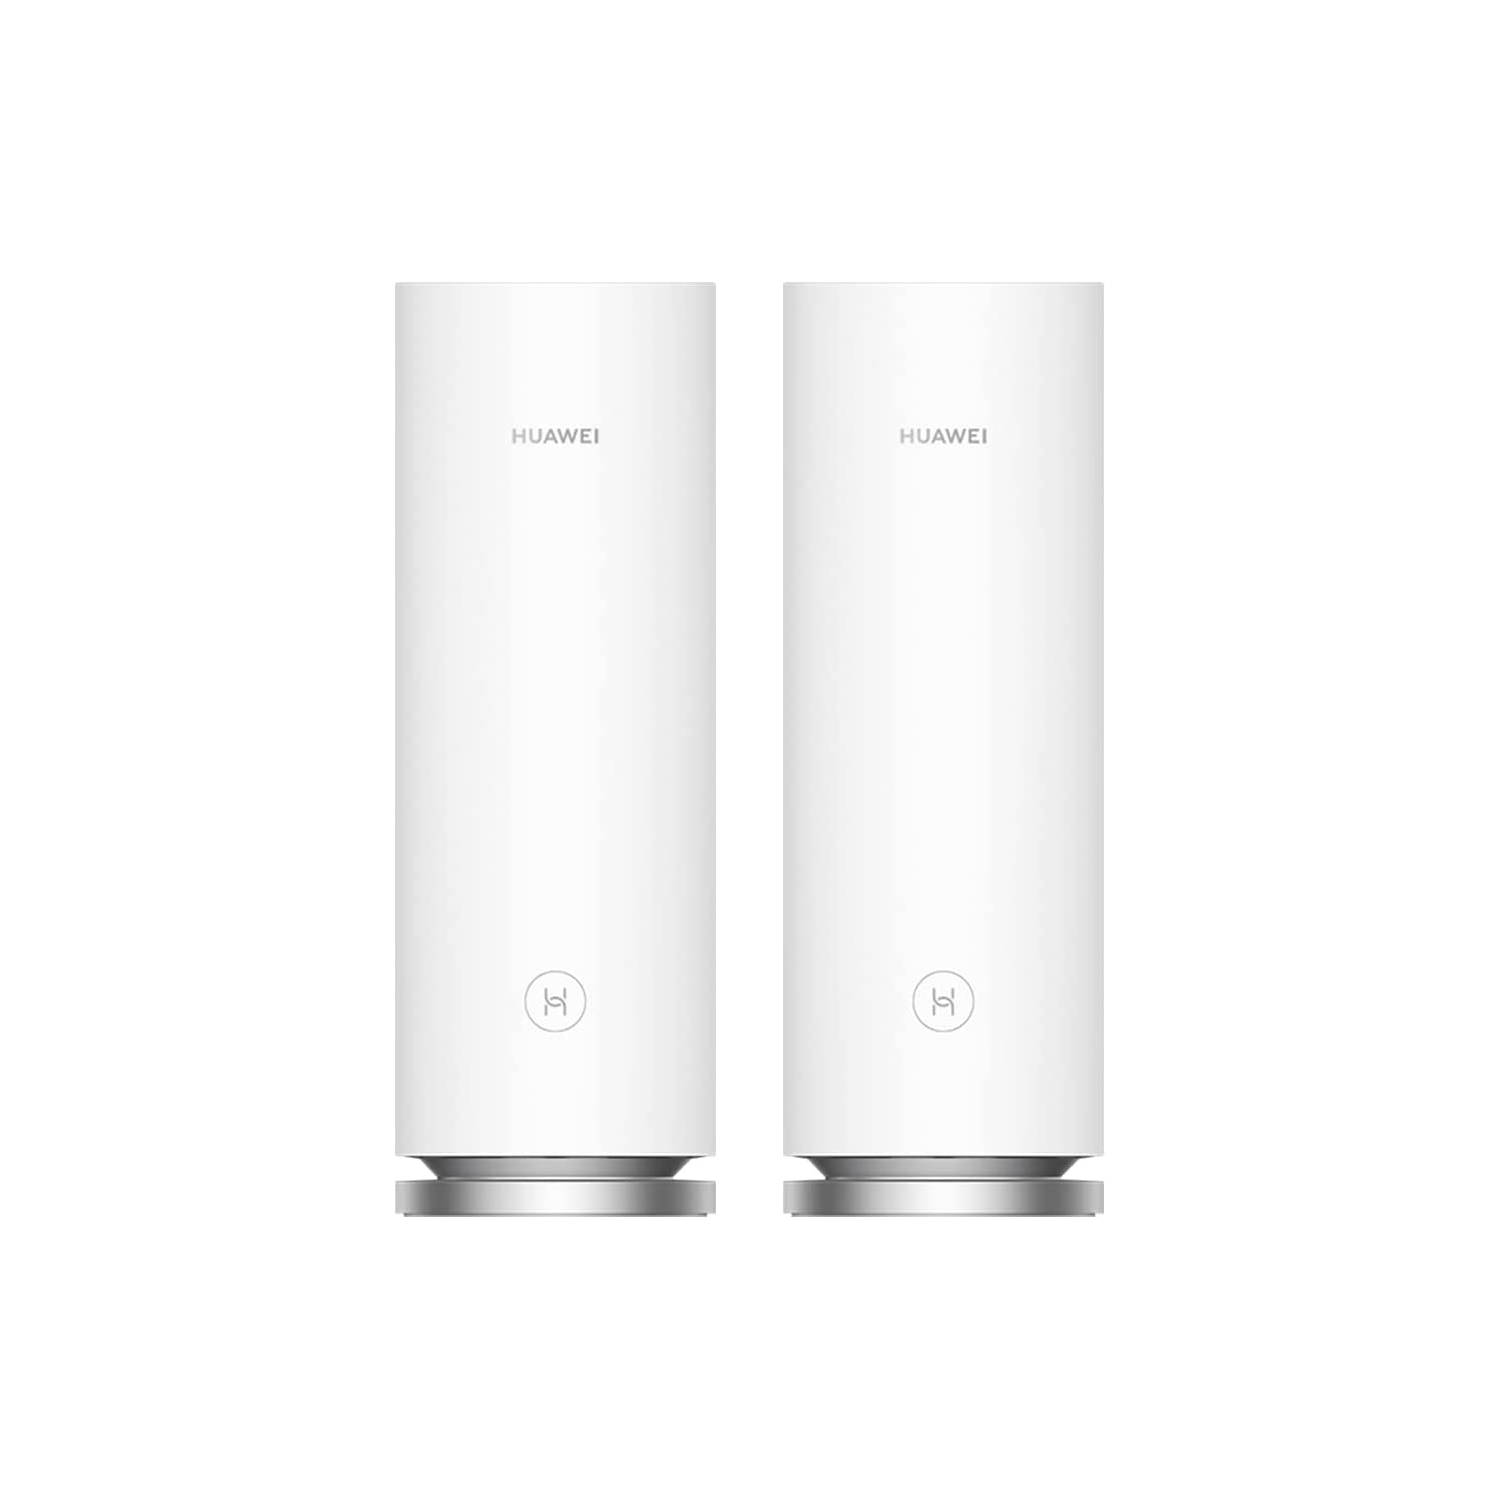 HUAWEI WiFi Mesh 7 AX6600 - Whole Home Mesh WiFi System, Seamless & Speedy, Up to 6600Mbps, Connect 250+ Devices, Ultra-Fast Connection in Big-Multi Homes – Pack of 2